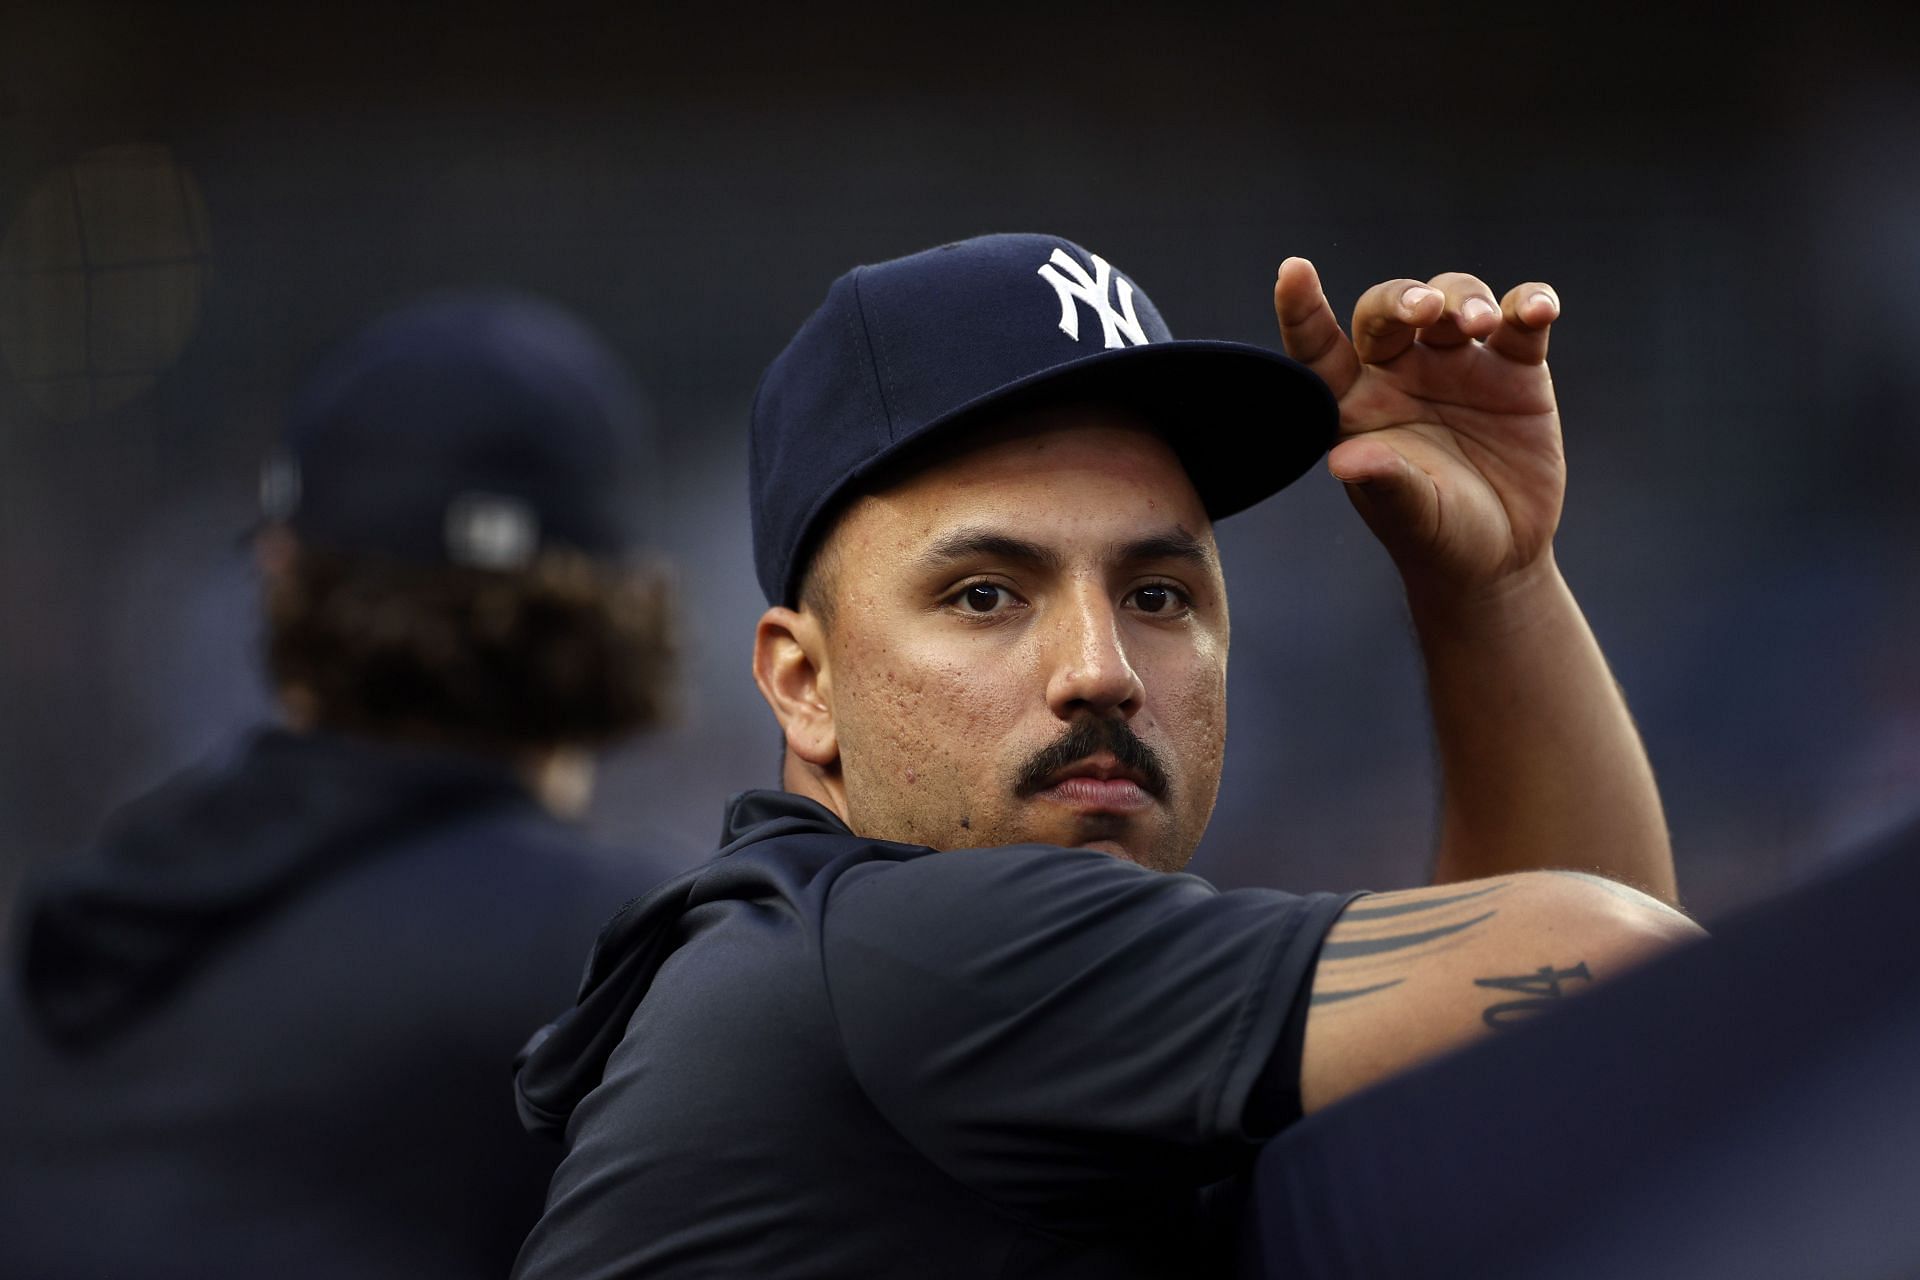 New York Yankees starting pitcher Nestor Cortes may have earned himself an unfortunate nickname this week.